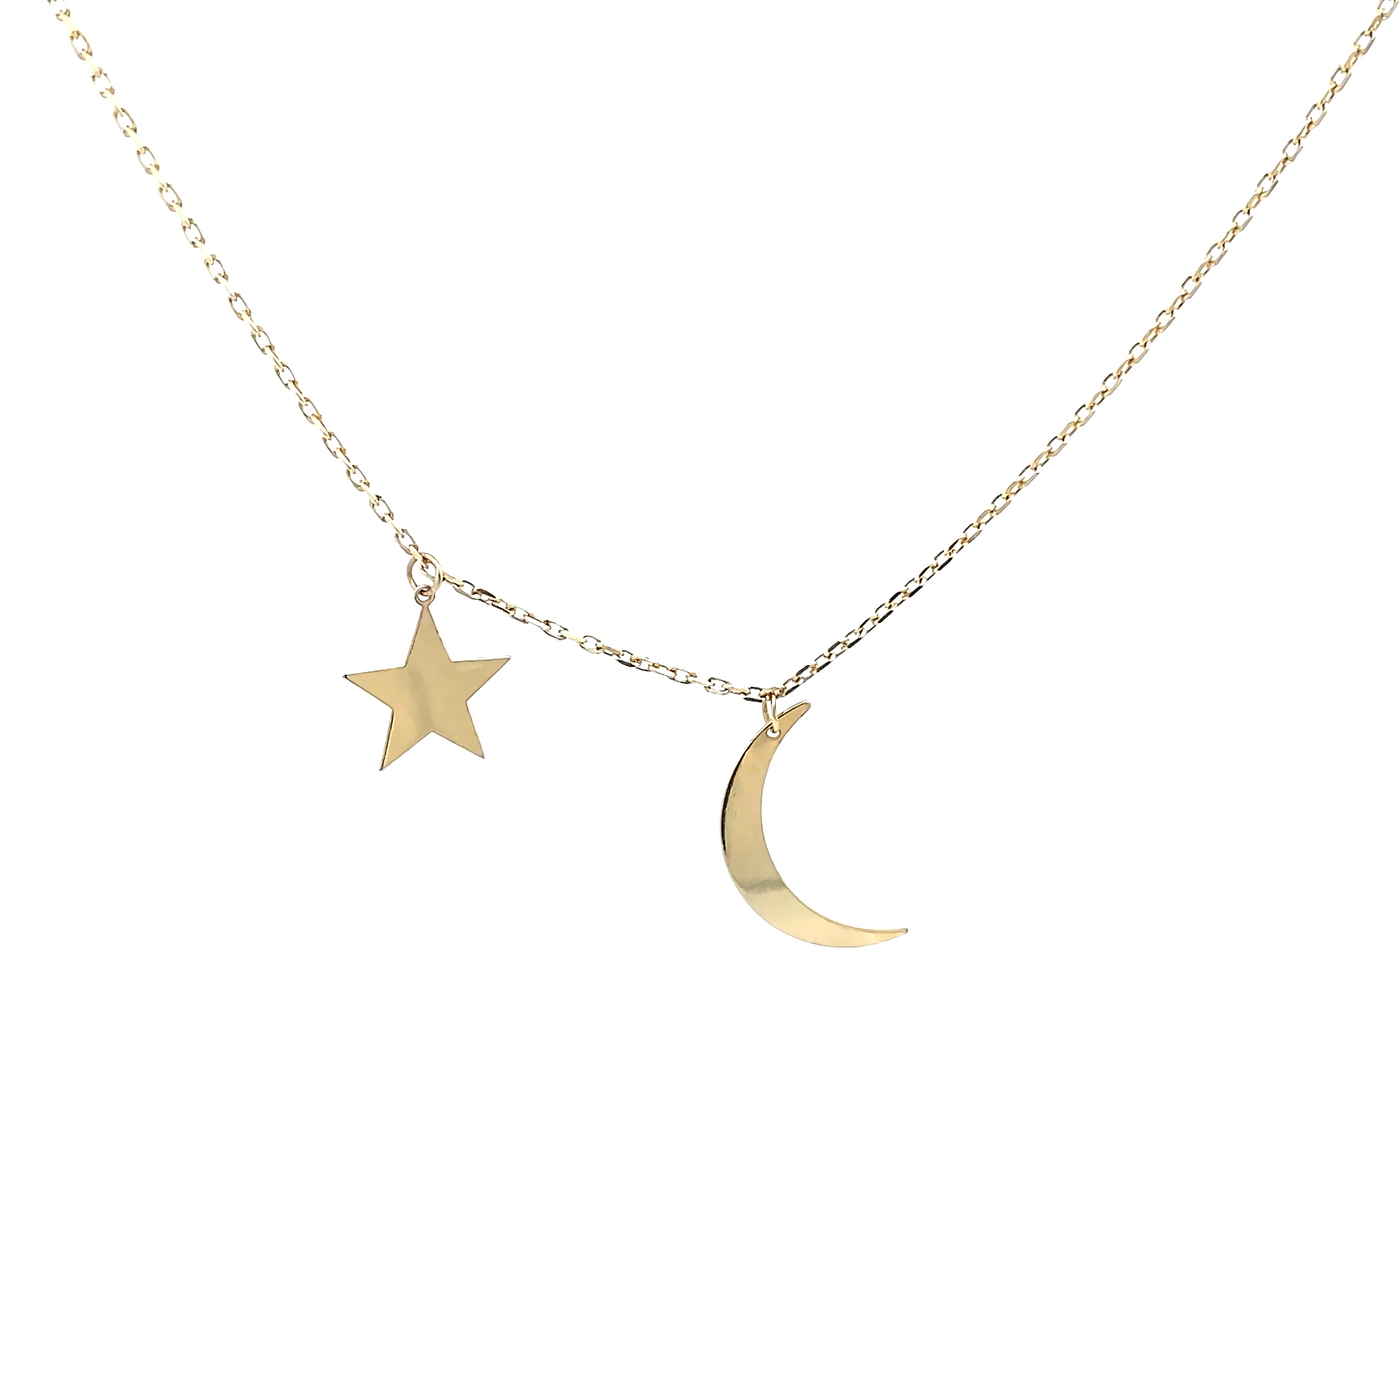 10 Karat Yellow Gold Crescent Moon and Star Necklace